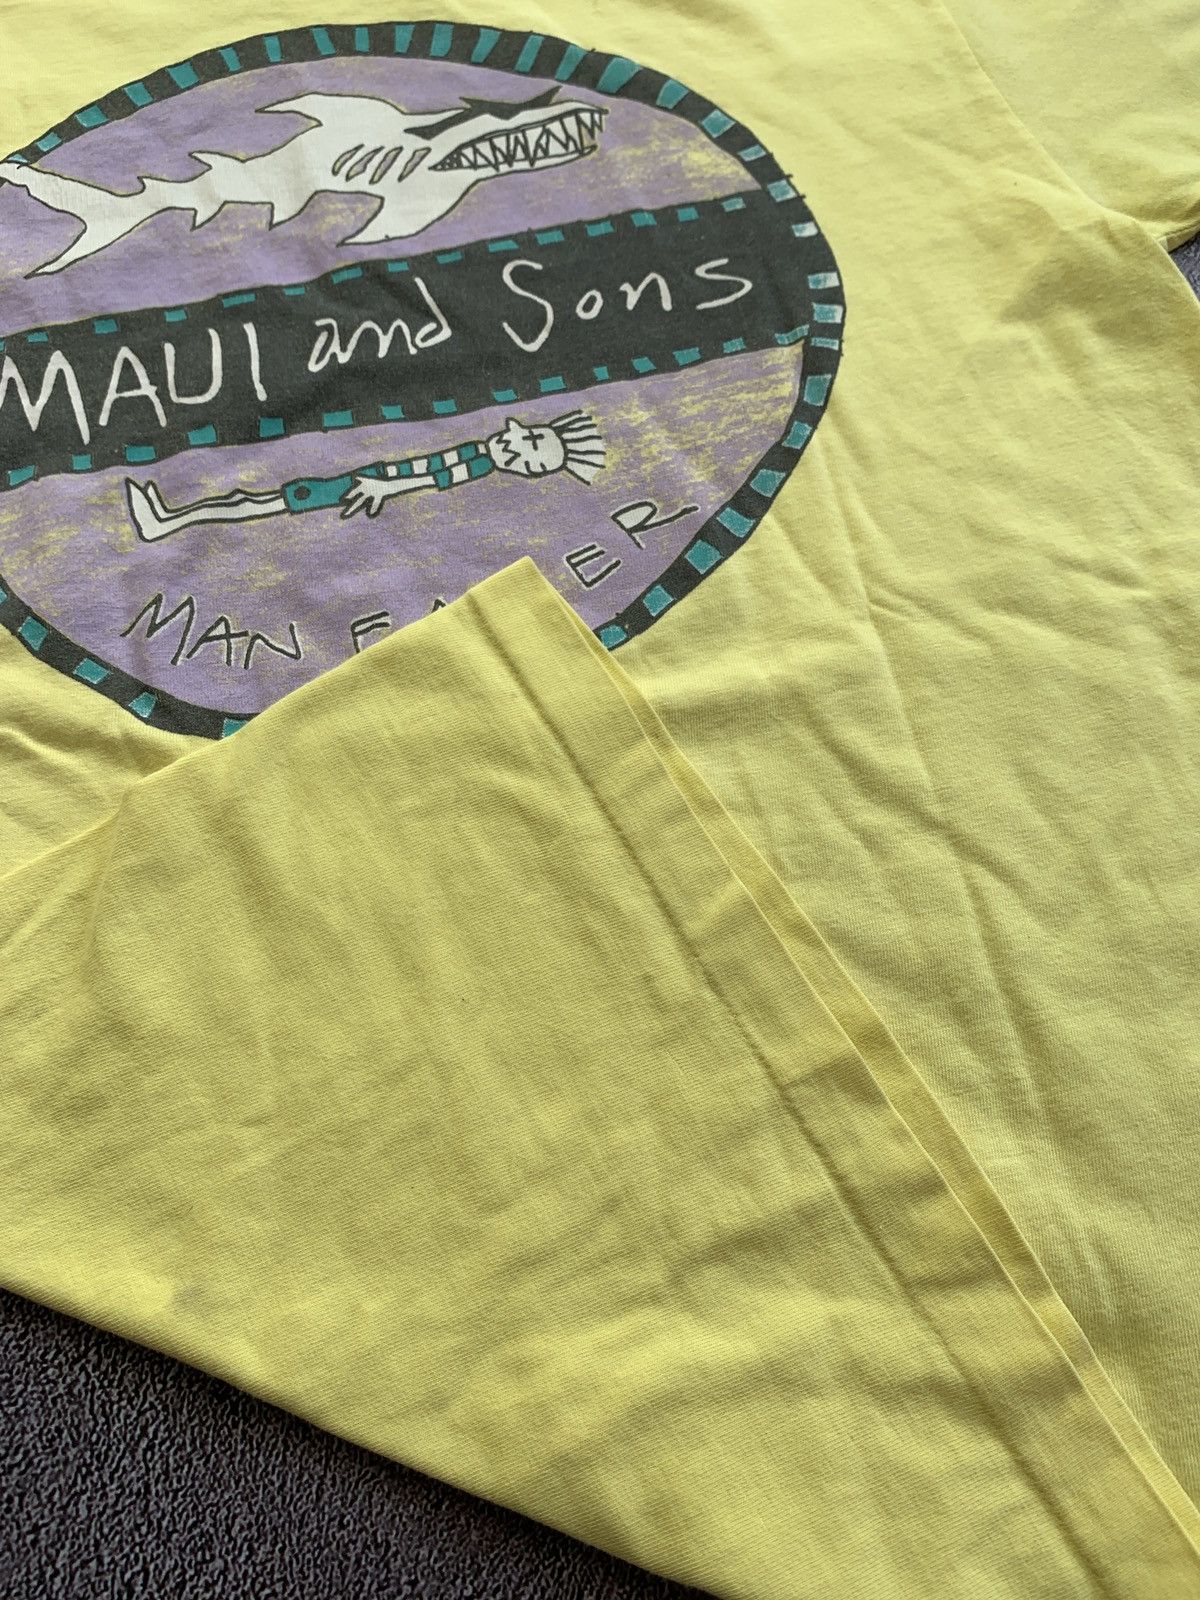 Vintage Vintage 90s Vintage Maui And Sons t shirt made in usa Size US M / EU 48-50 / 2 - 5 Thumbnail